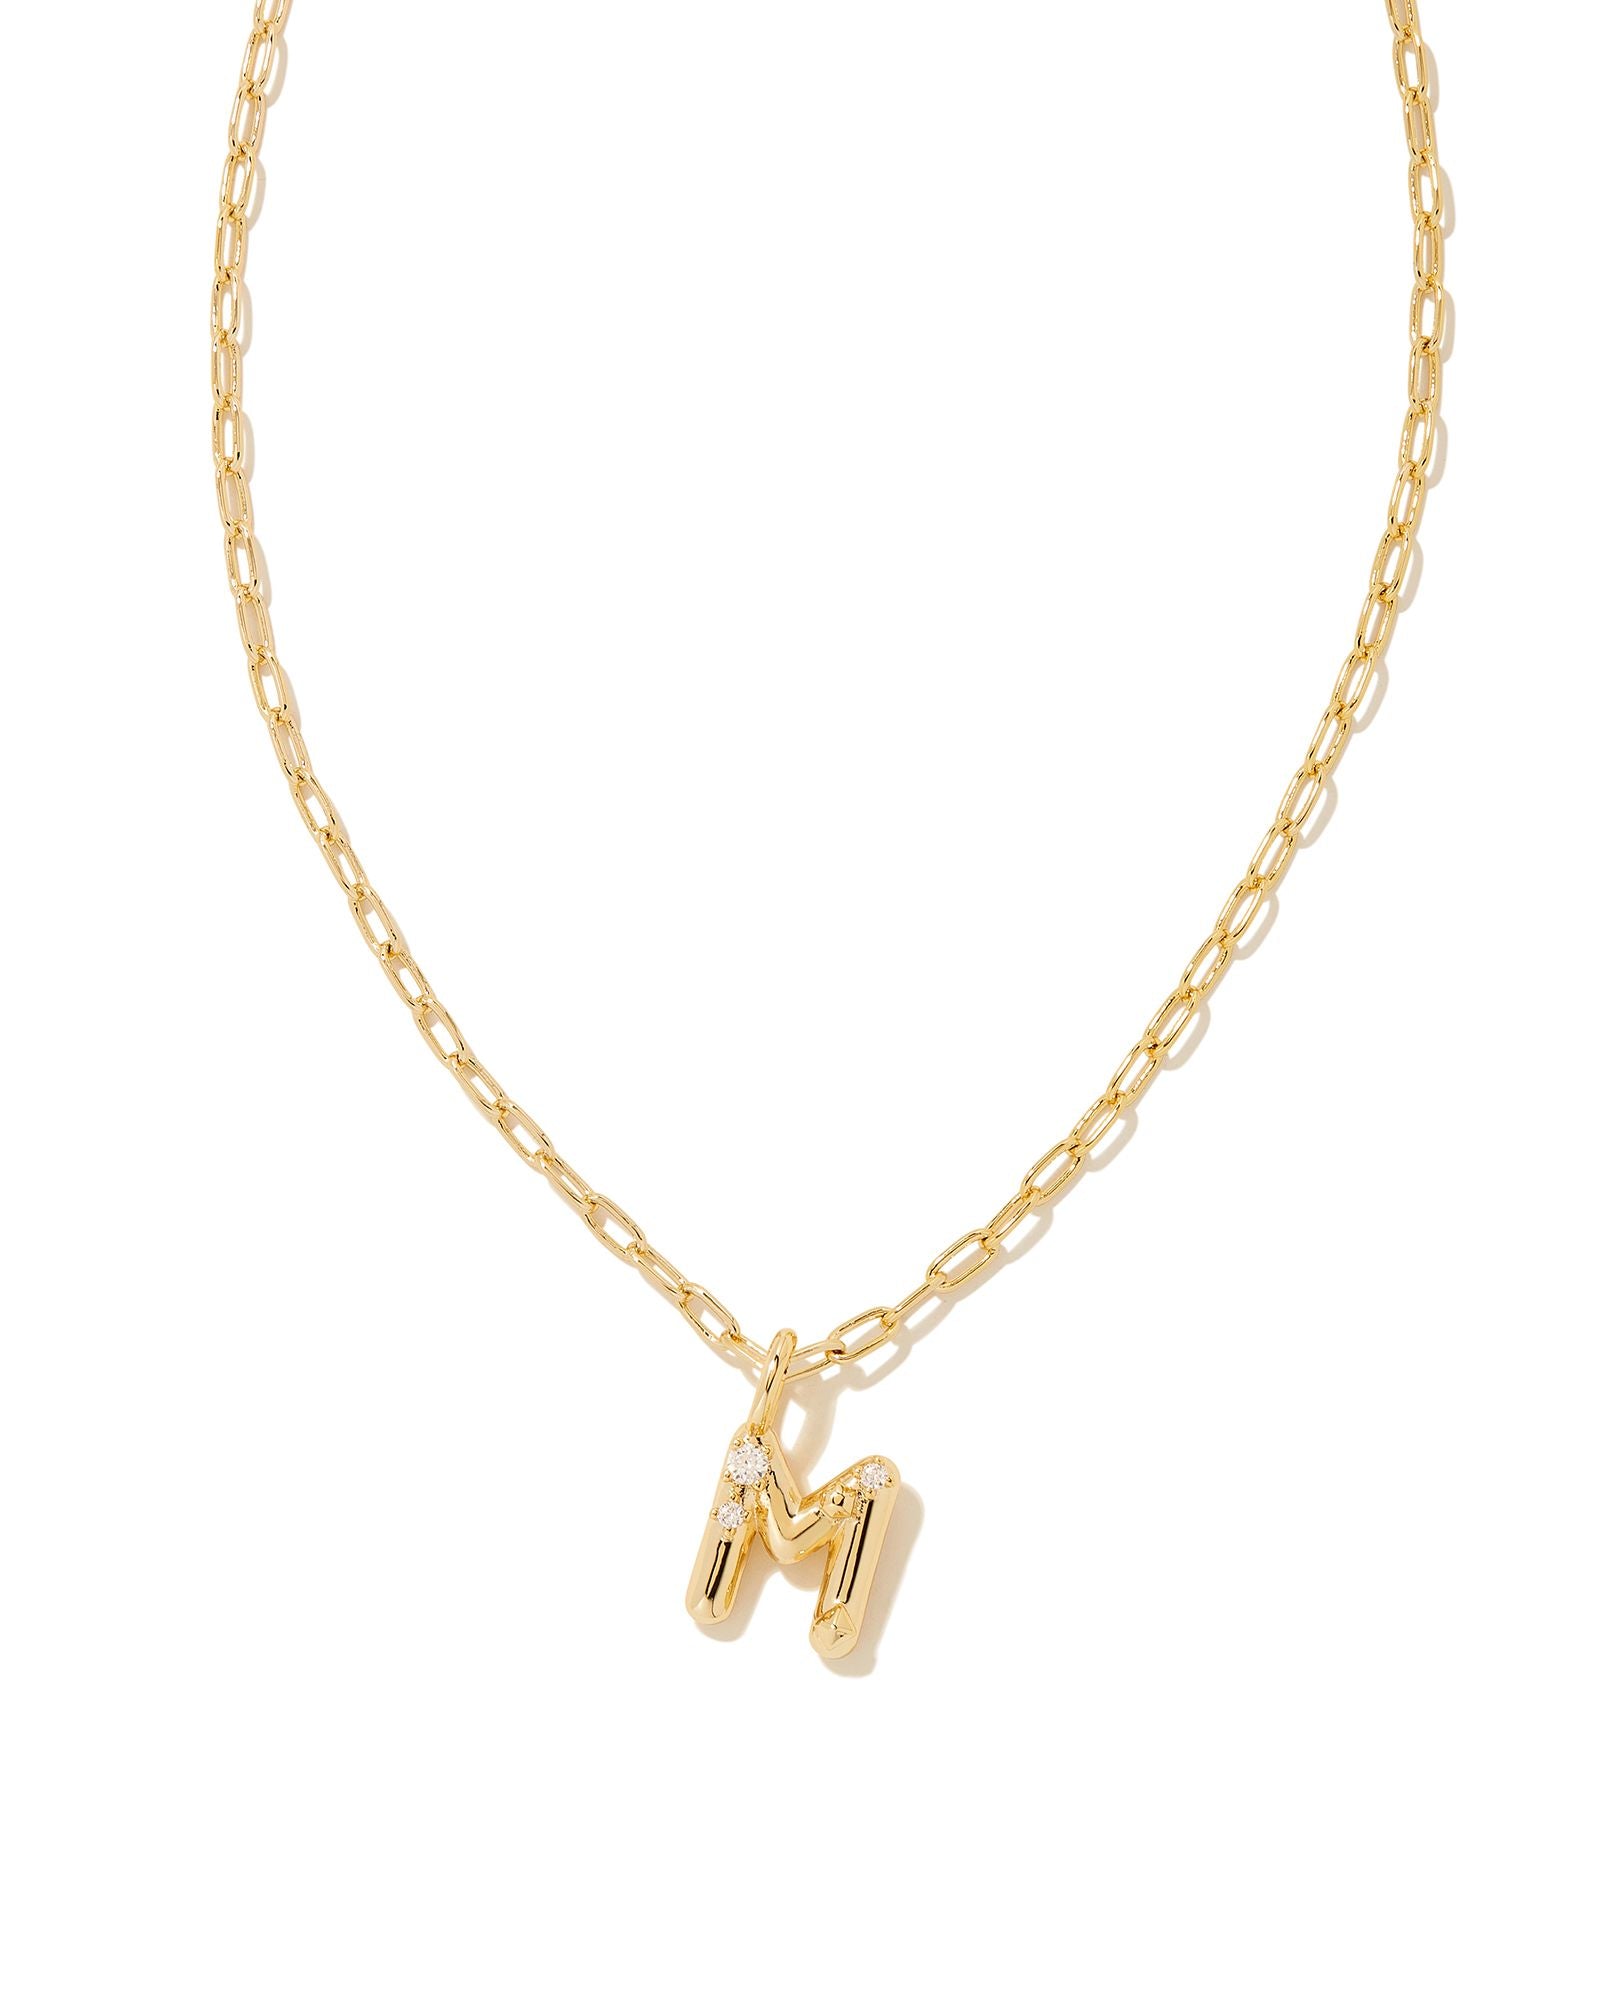 Crystal Letter Pendant Necklace Gold